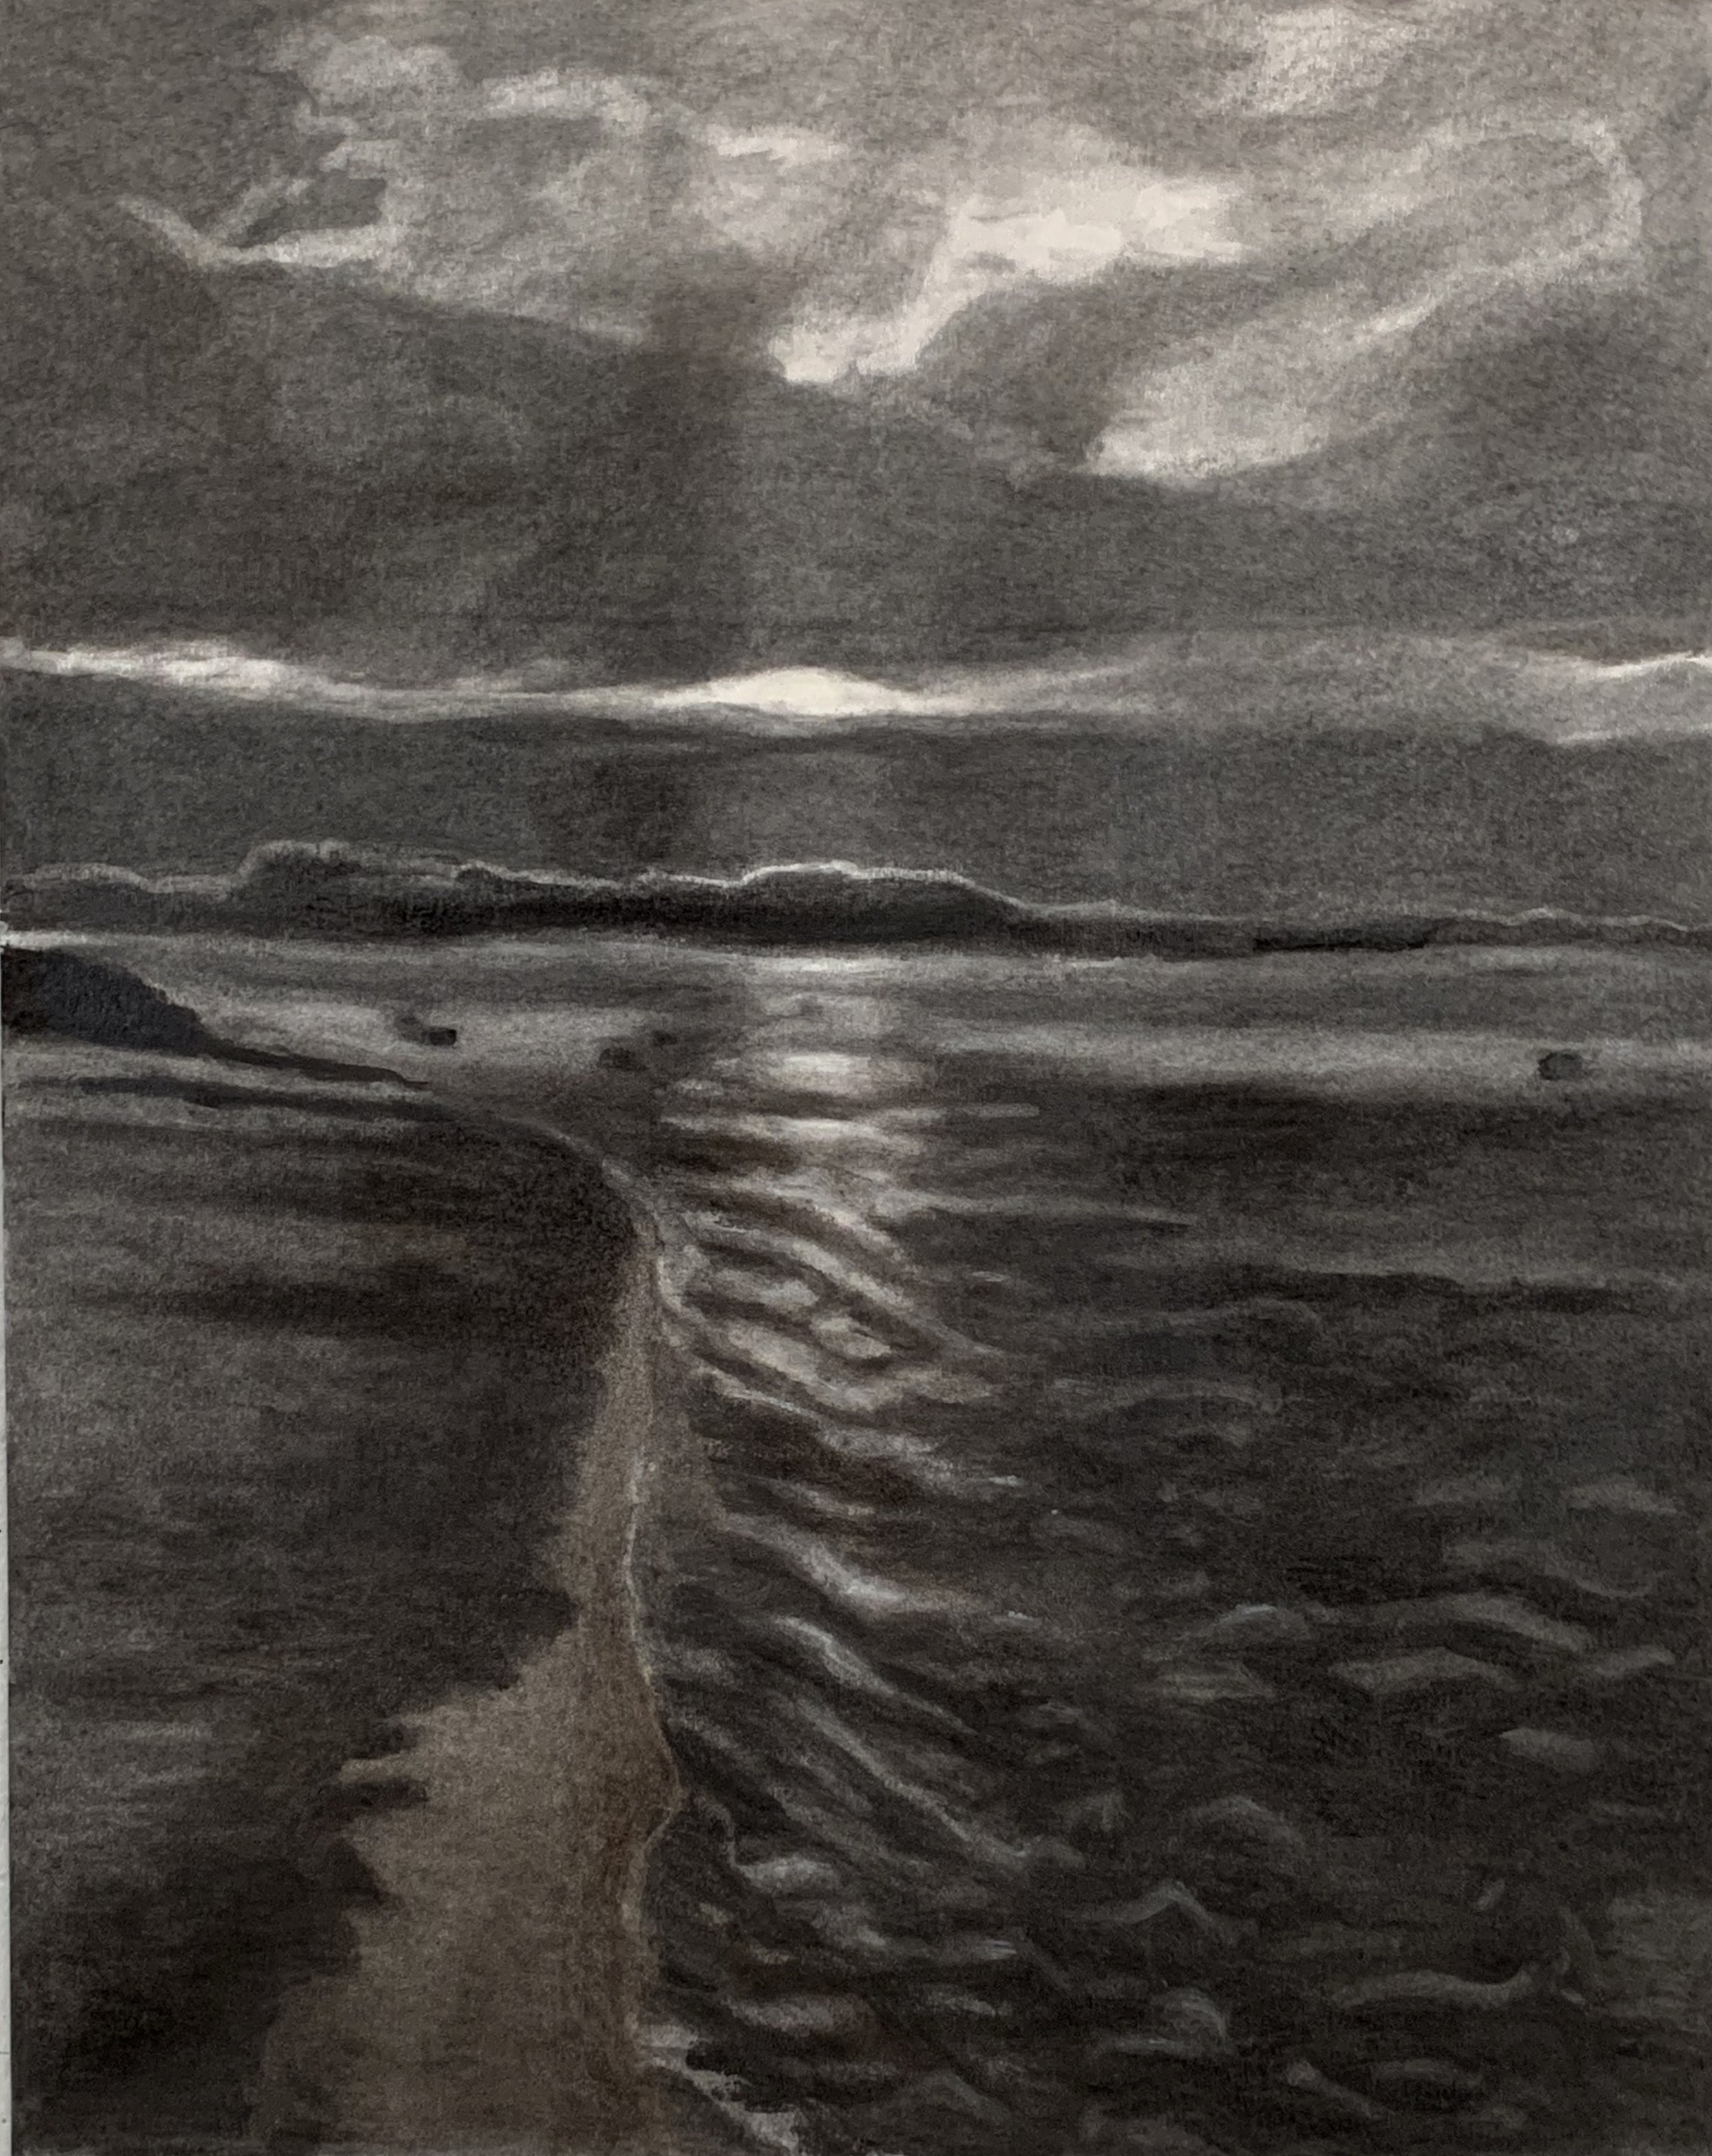   Sunrise at Gloucester Harbor  Charcoal with pastel on vellum mounted on aluminum. 23 x 18 in./ 58.4 x 45.7 cm. 2019 